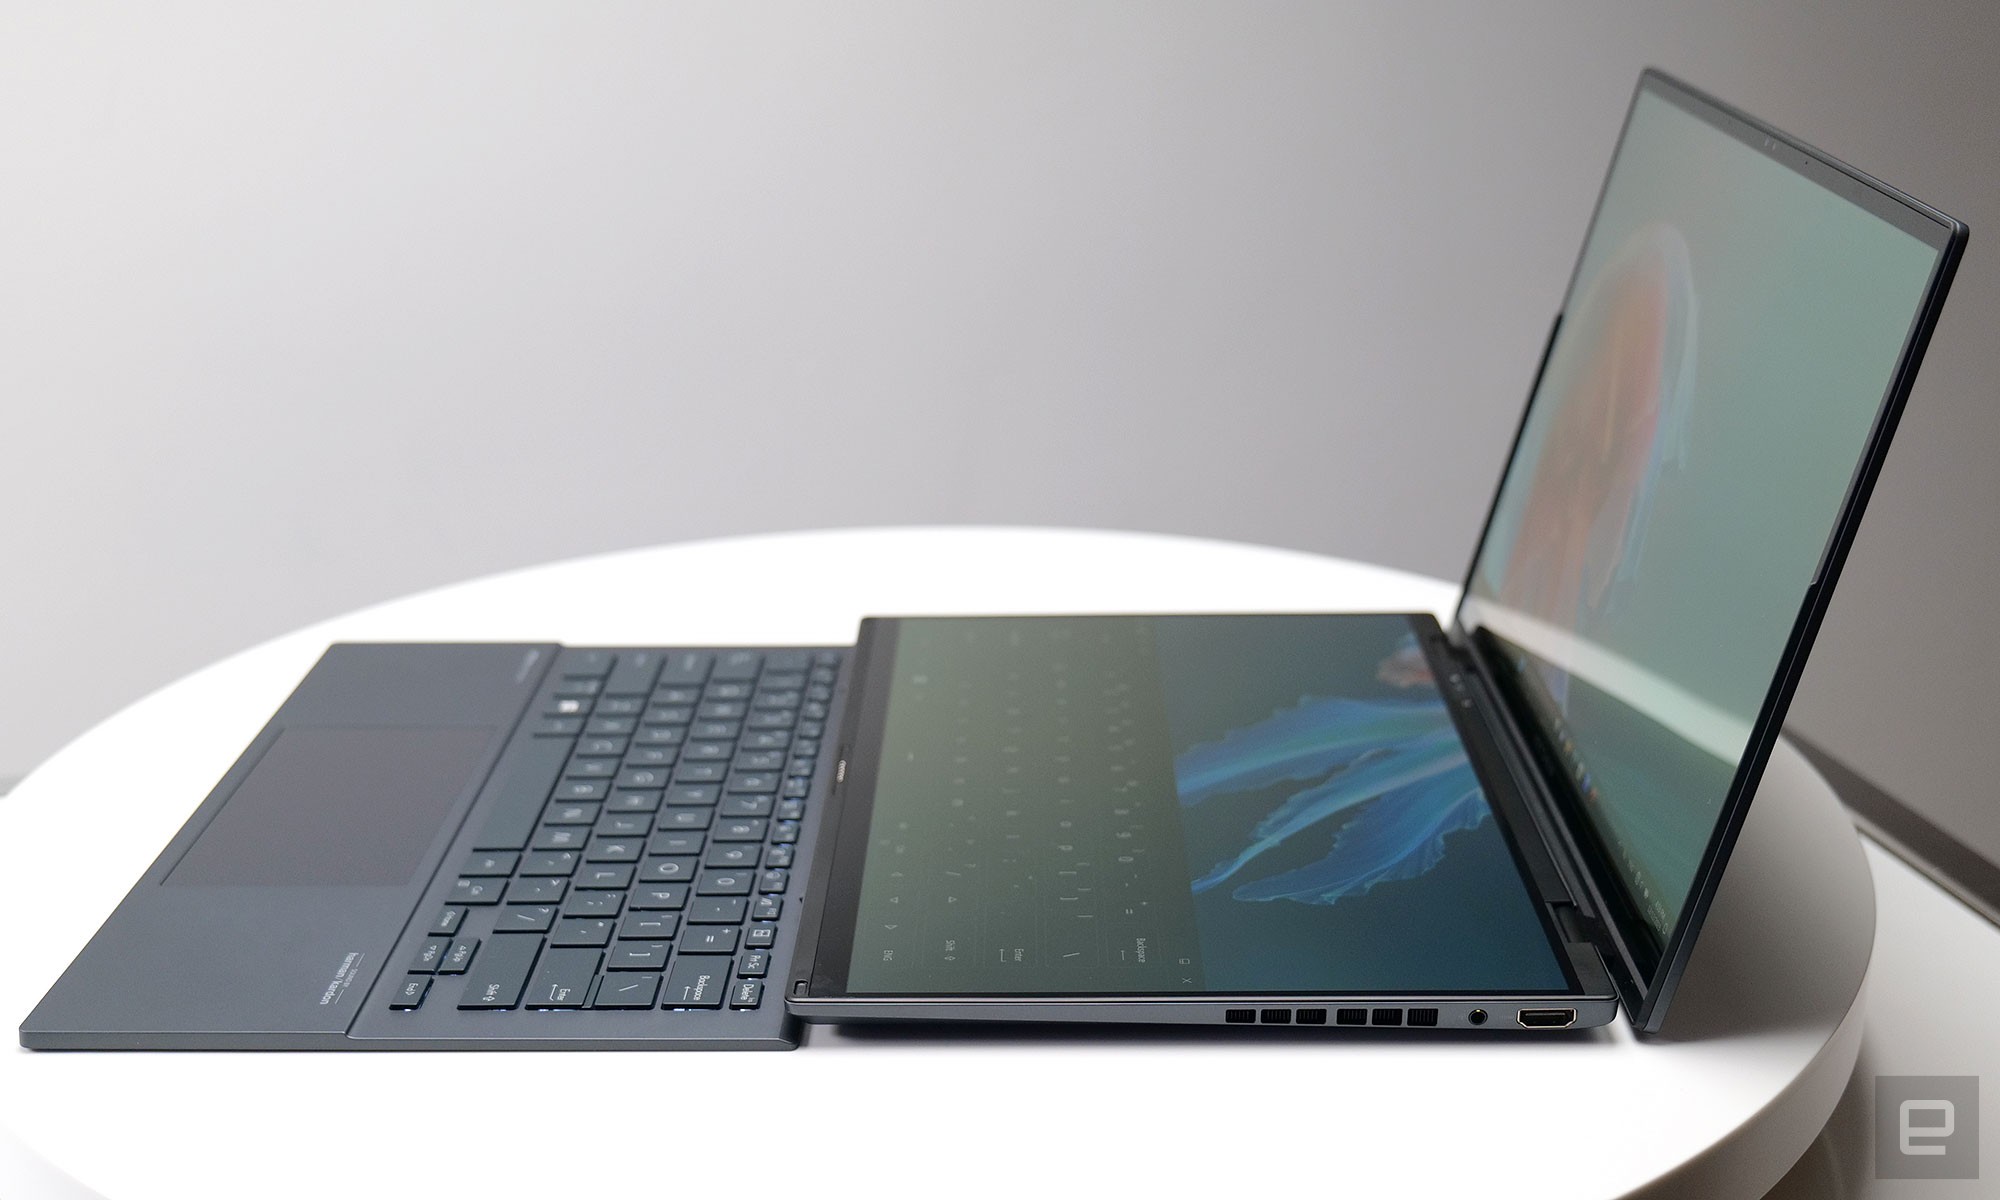 Similar to the Yoga Book 9i, the Zenbook Duo's BT keyboard and be detached to reveal a second display. 